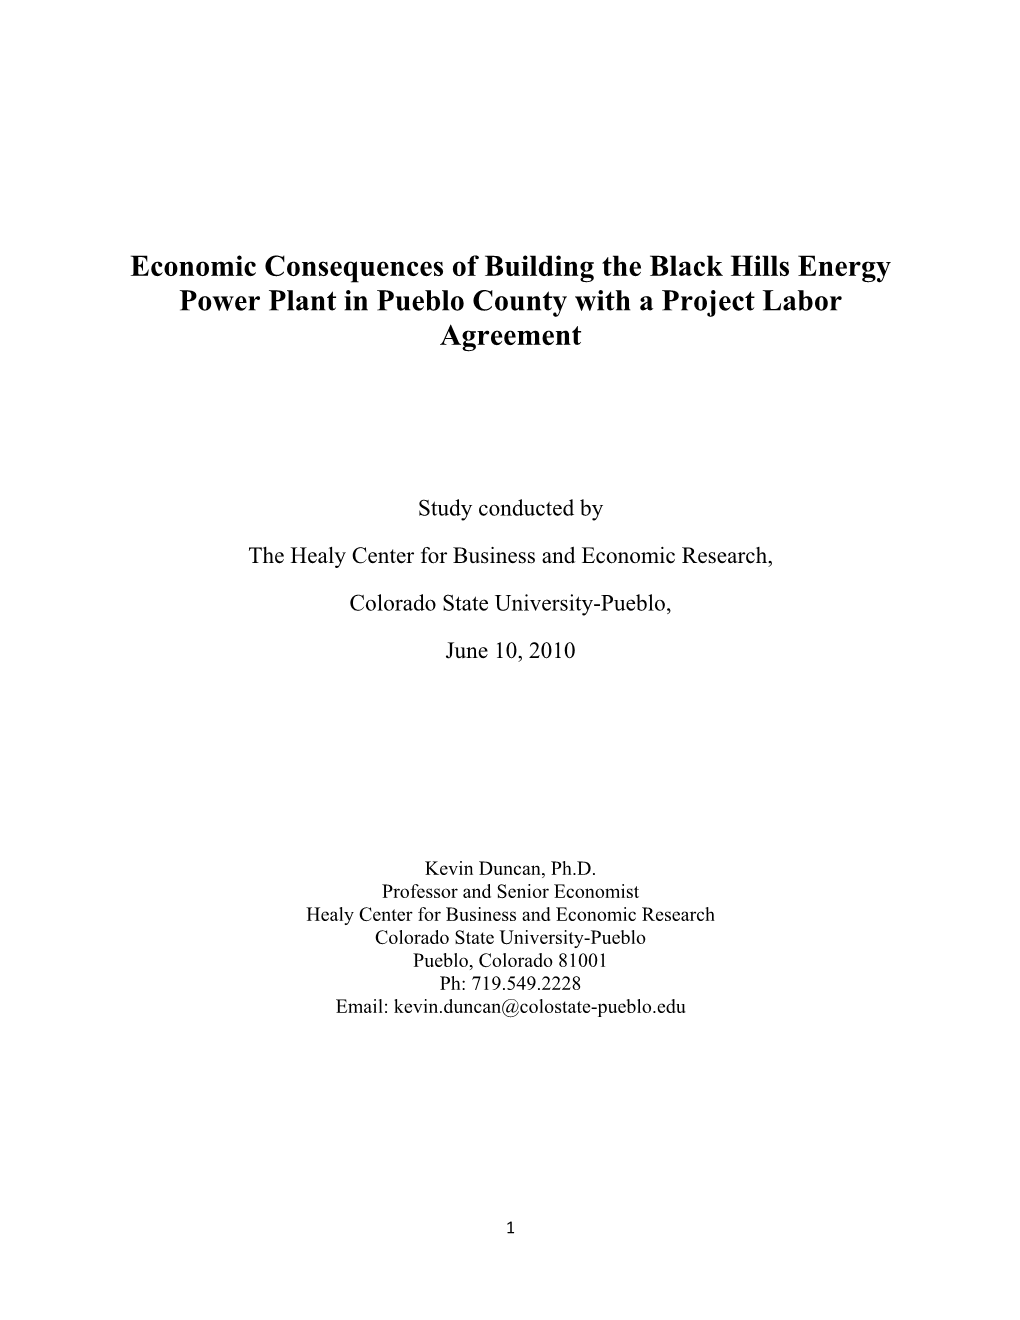 Economic Consequences of Building the Black Hills Energy Power Plant in Pueblo County with a Project Labor Agreement